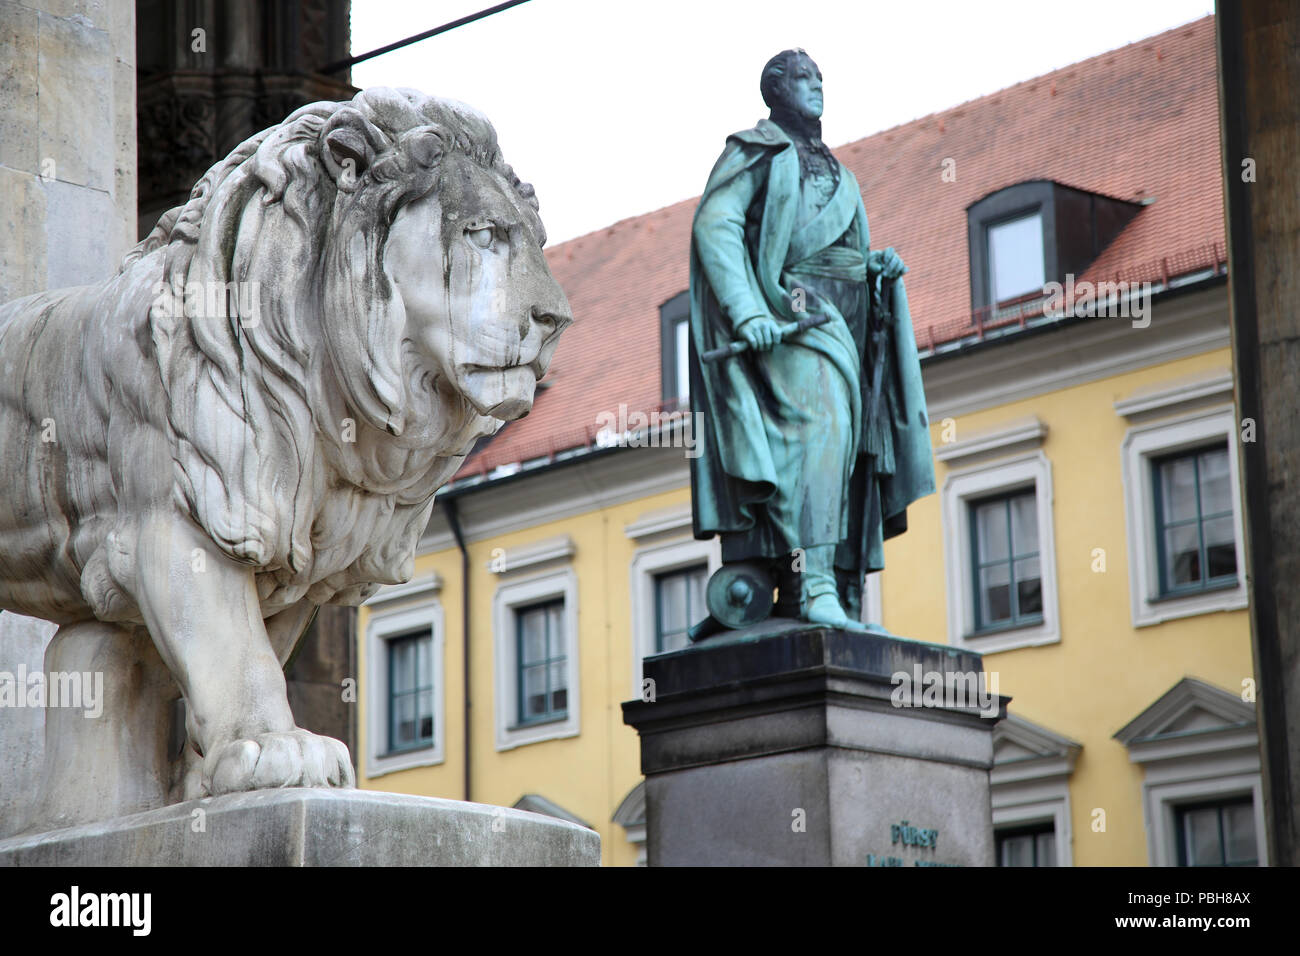 details of a stone lion sculpture and  Statue of Karl Wrede at the Odeonsplatz - Feldherrnhalle in Munich Germany Stock Photo